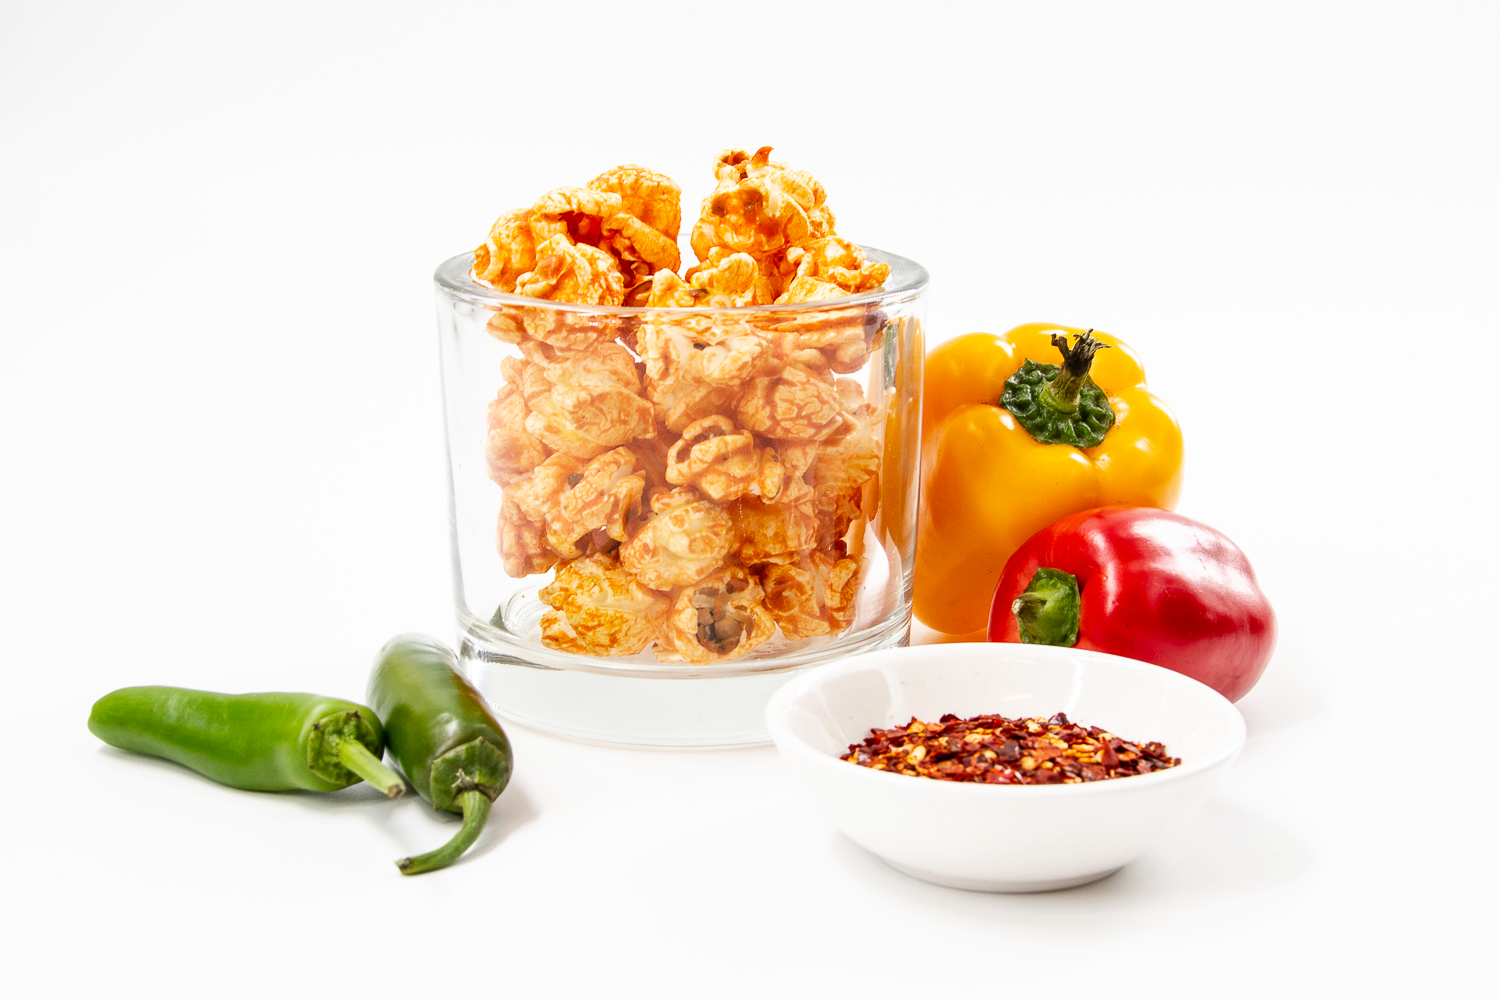 Hot & Spicy Gourmet Popcorn displayed in cup with red pepper, yellow pepper, jalapeno and spices